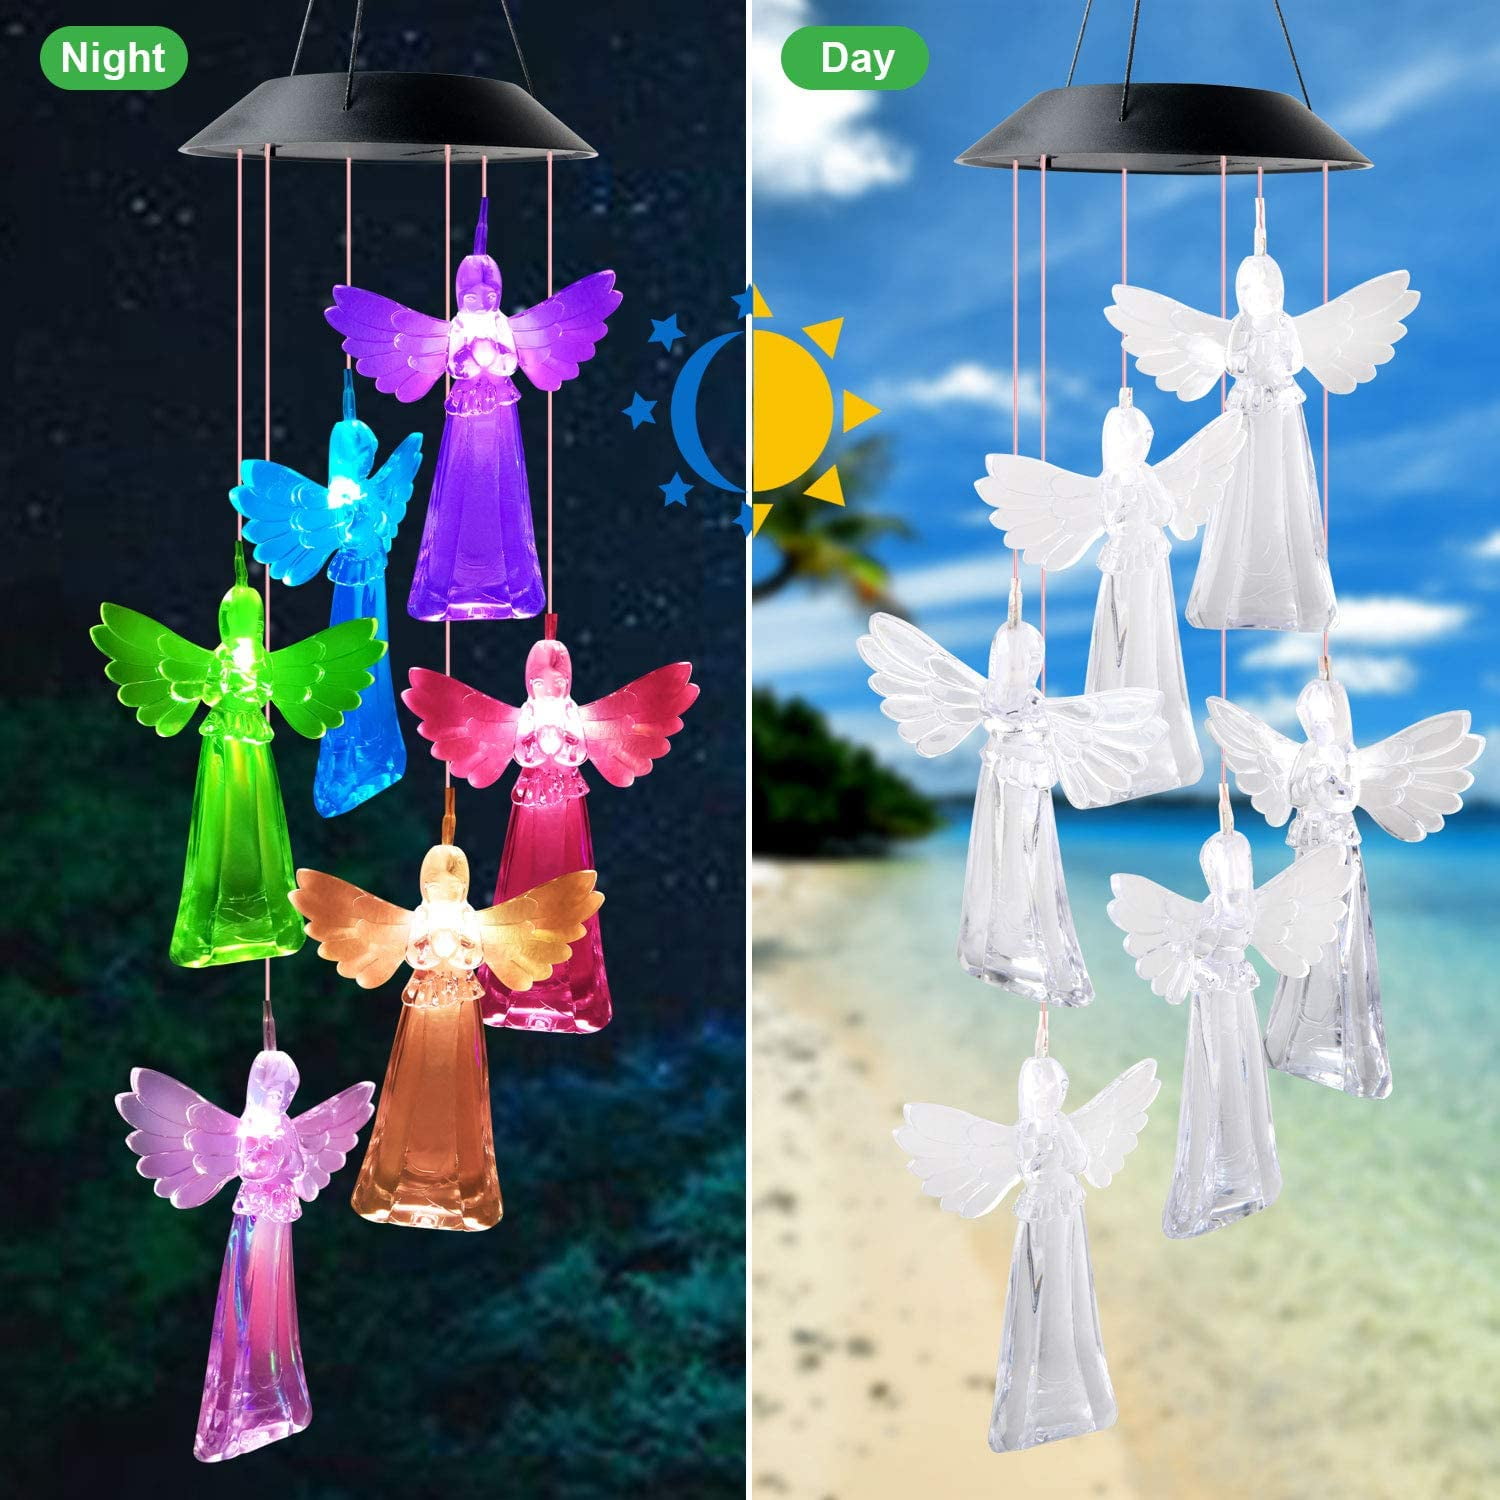 Colors Changing Solar Angel Wind Chimes Great Gifts for Mom Girlfriend Wife Waterproof Indoor Outdoor Home/Yard/Patio/Garden Romantic Decoration LVJING Solar Wind Chime